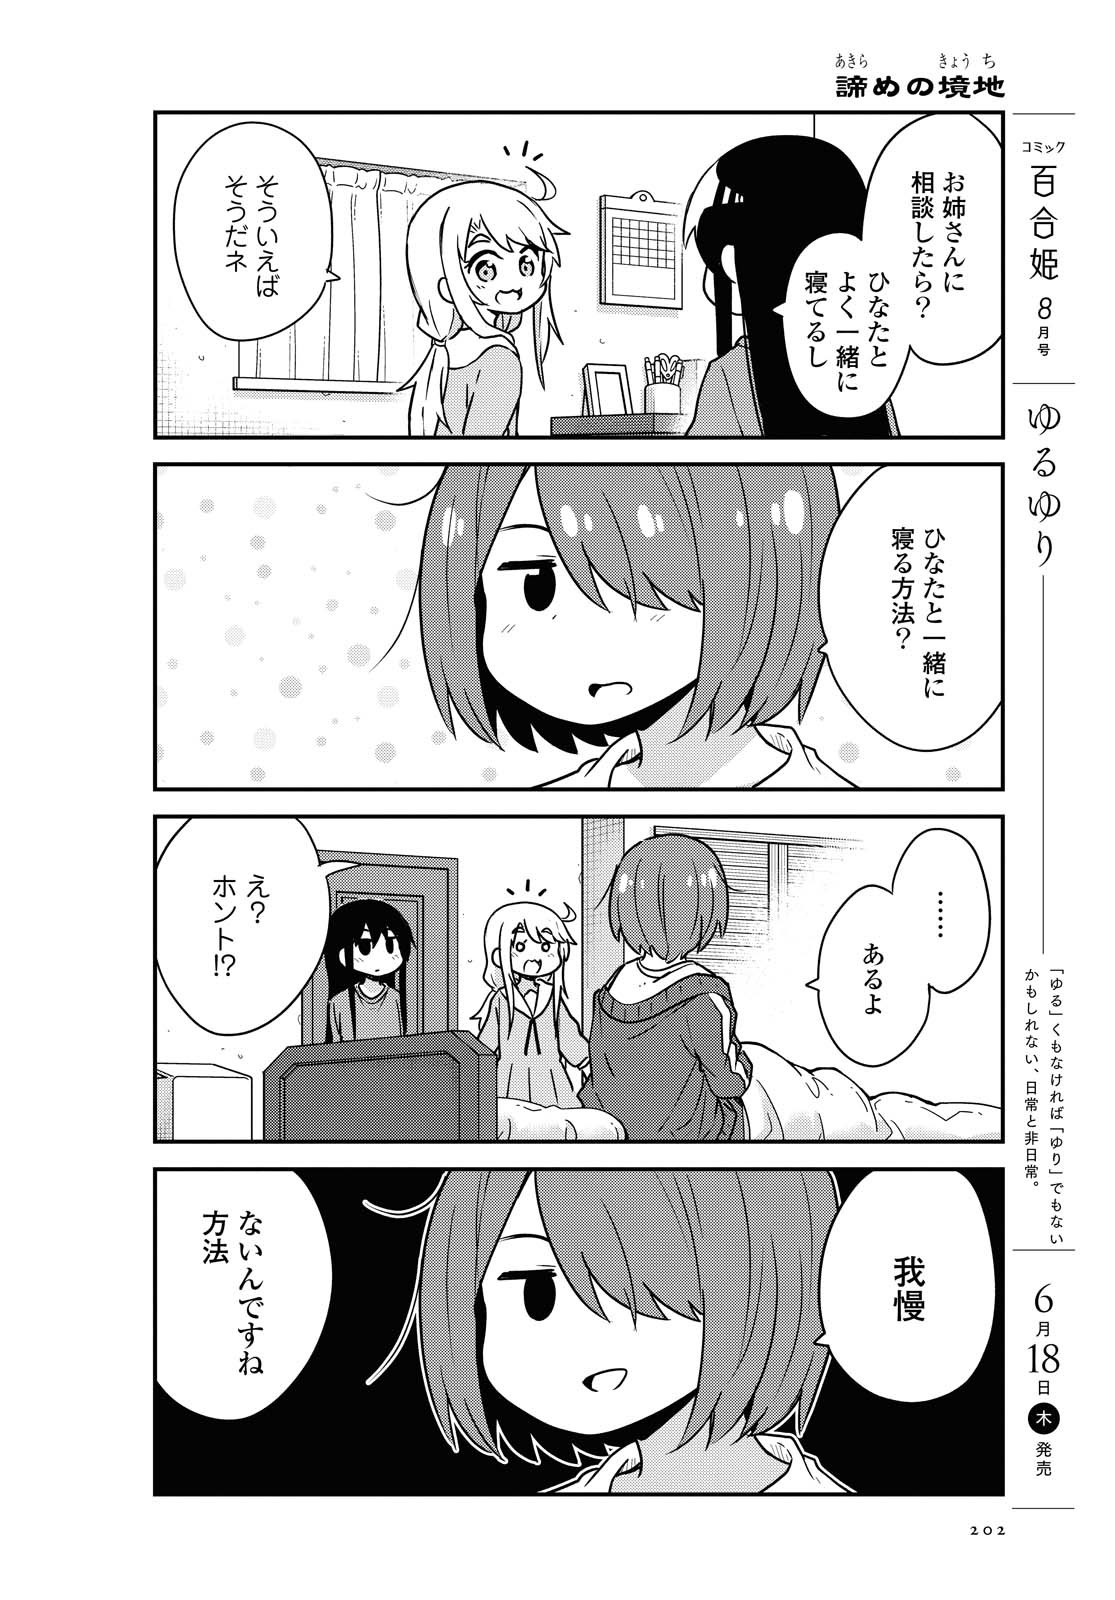 Wataten! An Angel Flew Down to Me 私に天使が舞い降りた！ 第66話 - Page 4